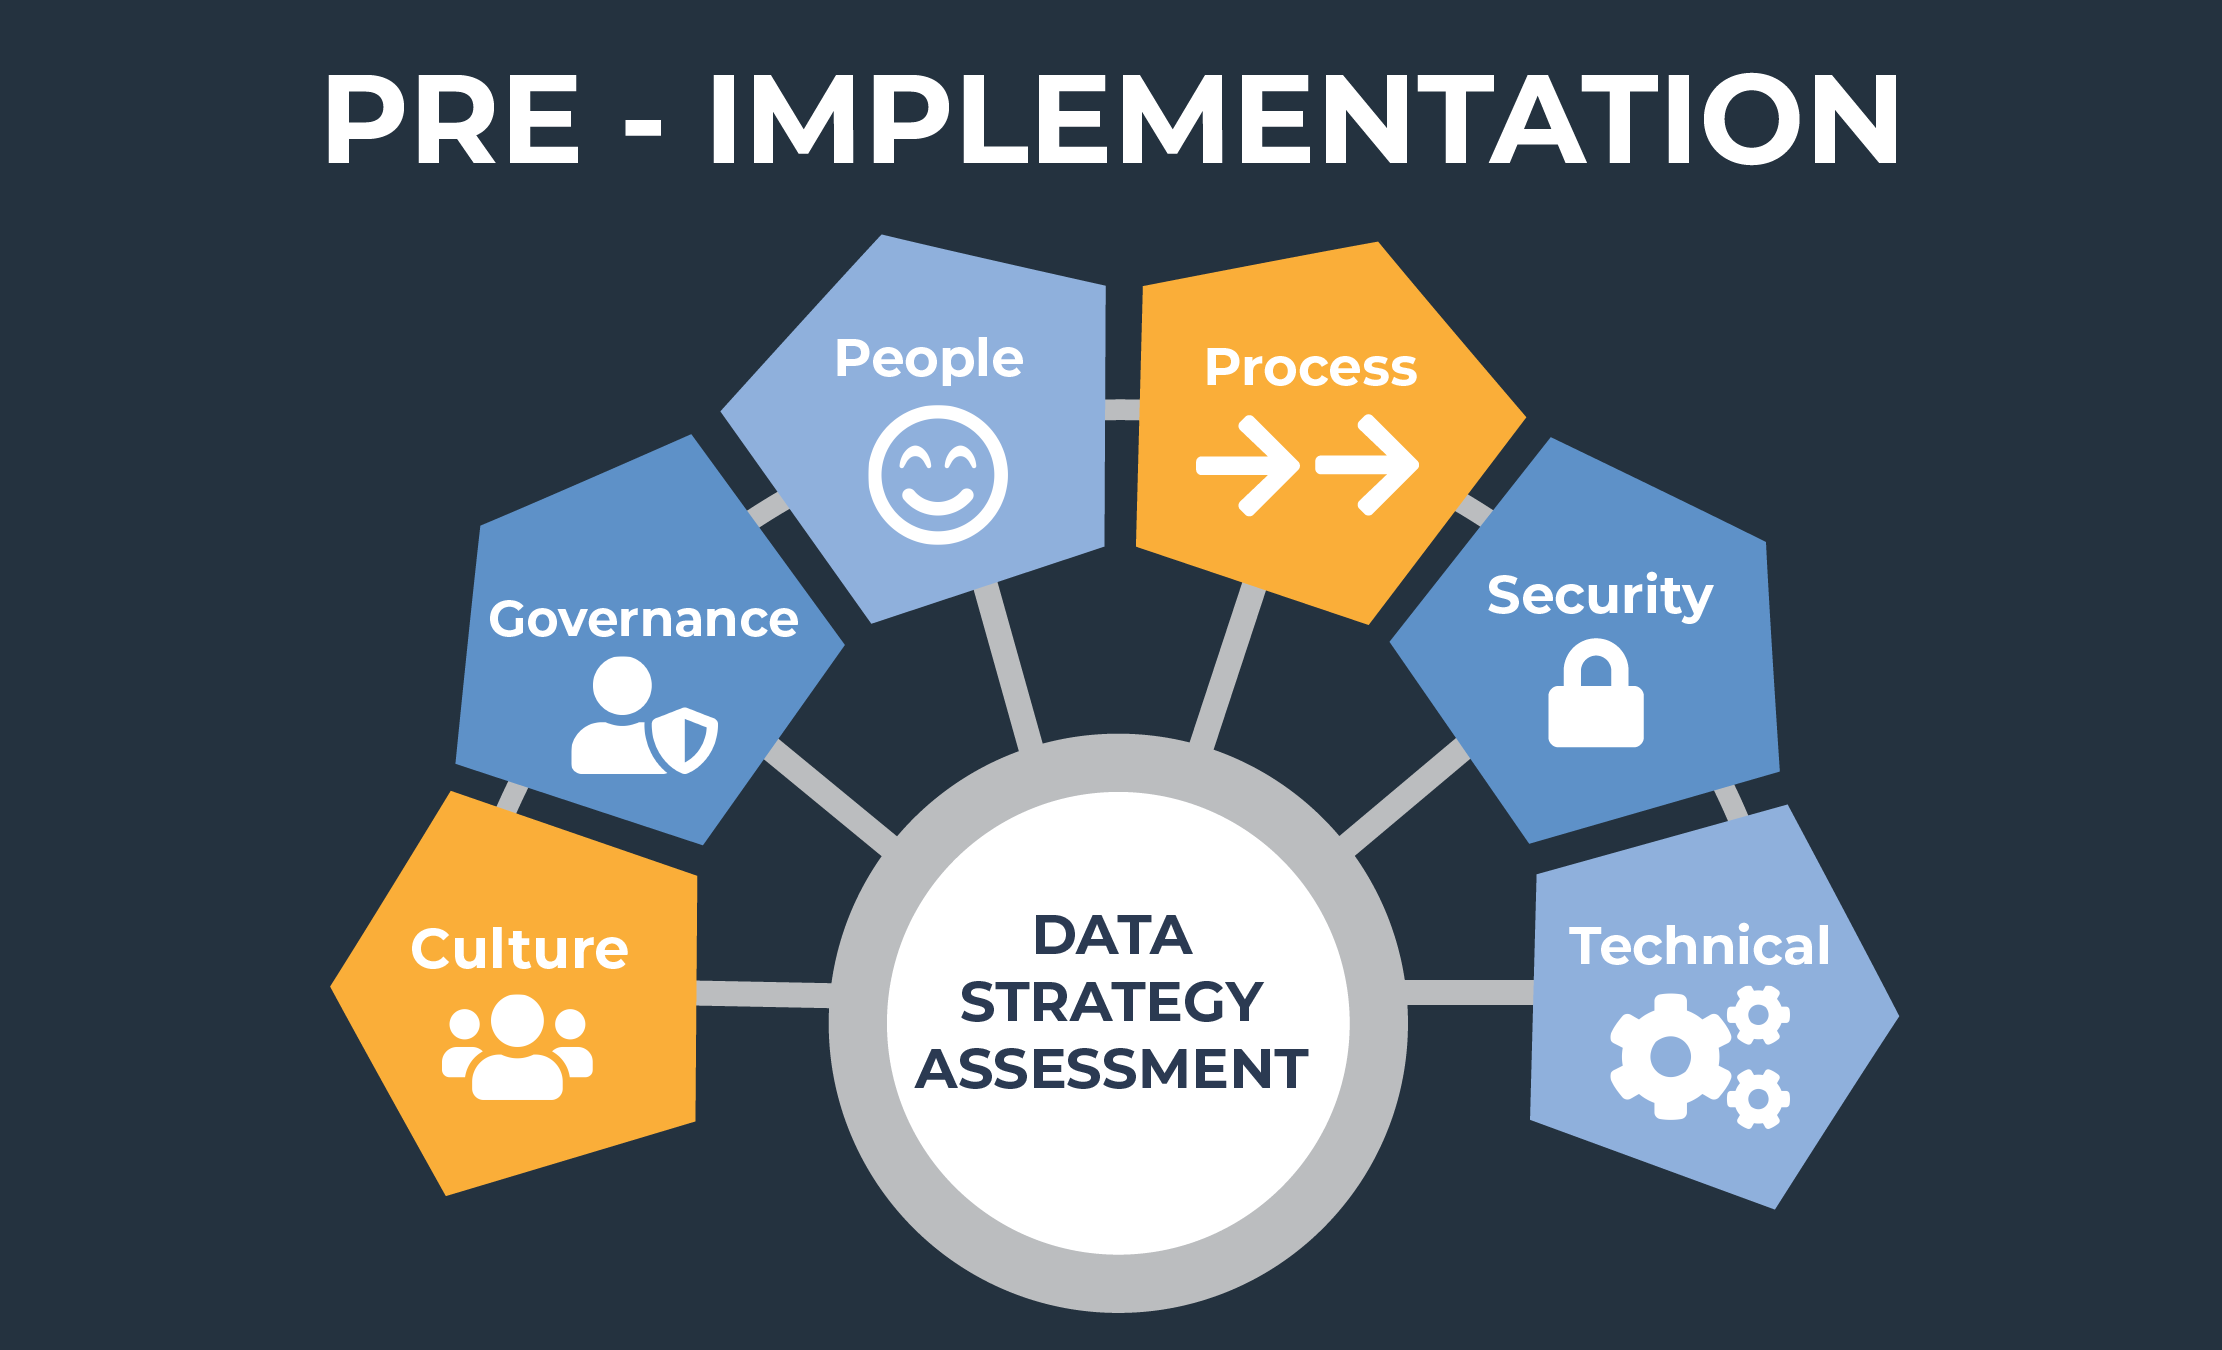 6 components of a data strategy assessment